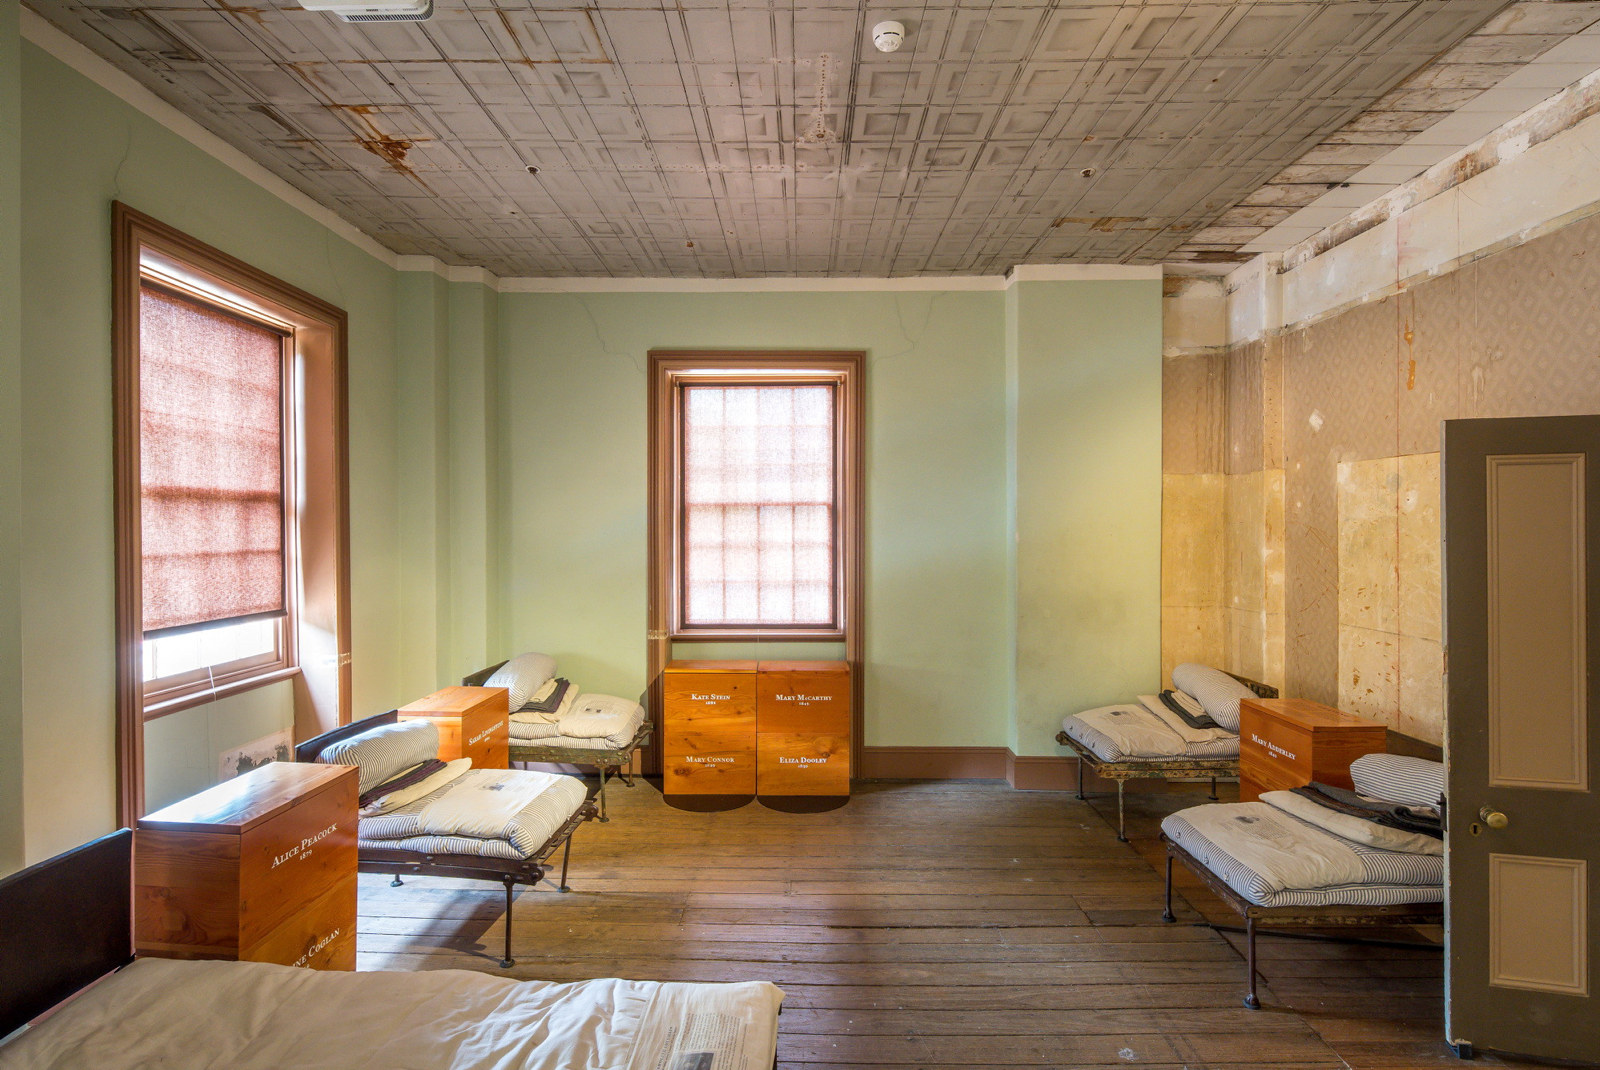 Interior of wooden floorboarded room with natural light coming in window at end. Several beds placed around green painted walls.